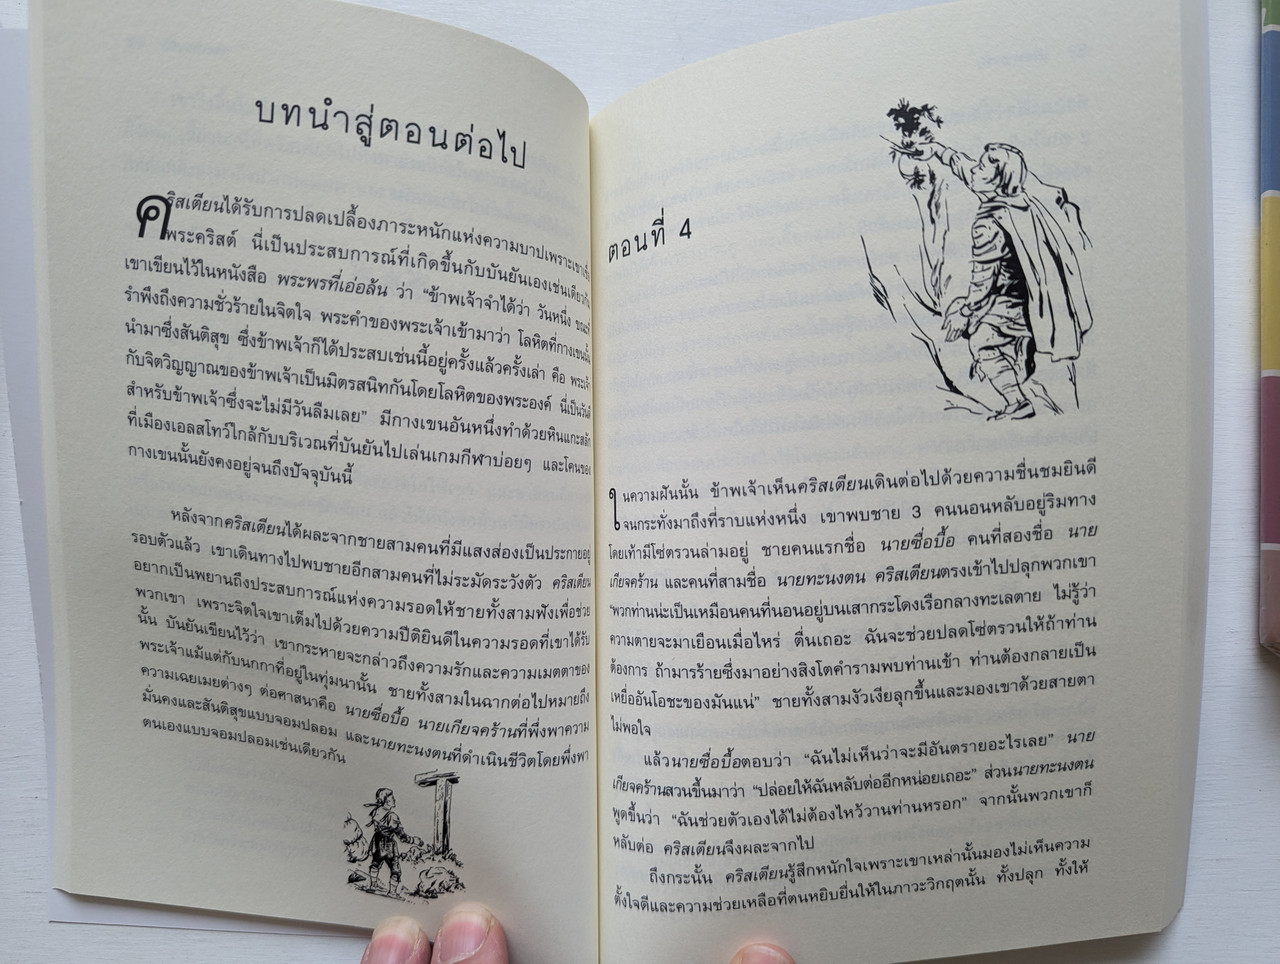 https://cdn10.bigcommerce.com/s-62bdpkt7pb/products/5751/images/311828/The_New_Pilgrims_Progress_Thai_Language_Edition_One_Mans_Search_for_Eternal_Life_5__34666.1699809839.1280.1280.jpg?c=2